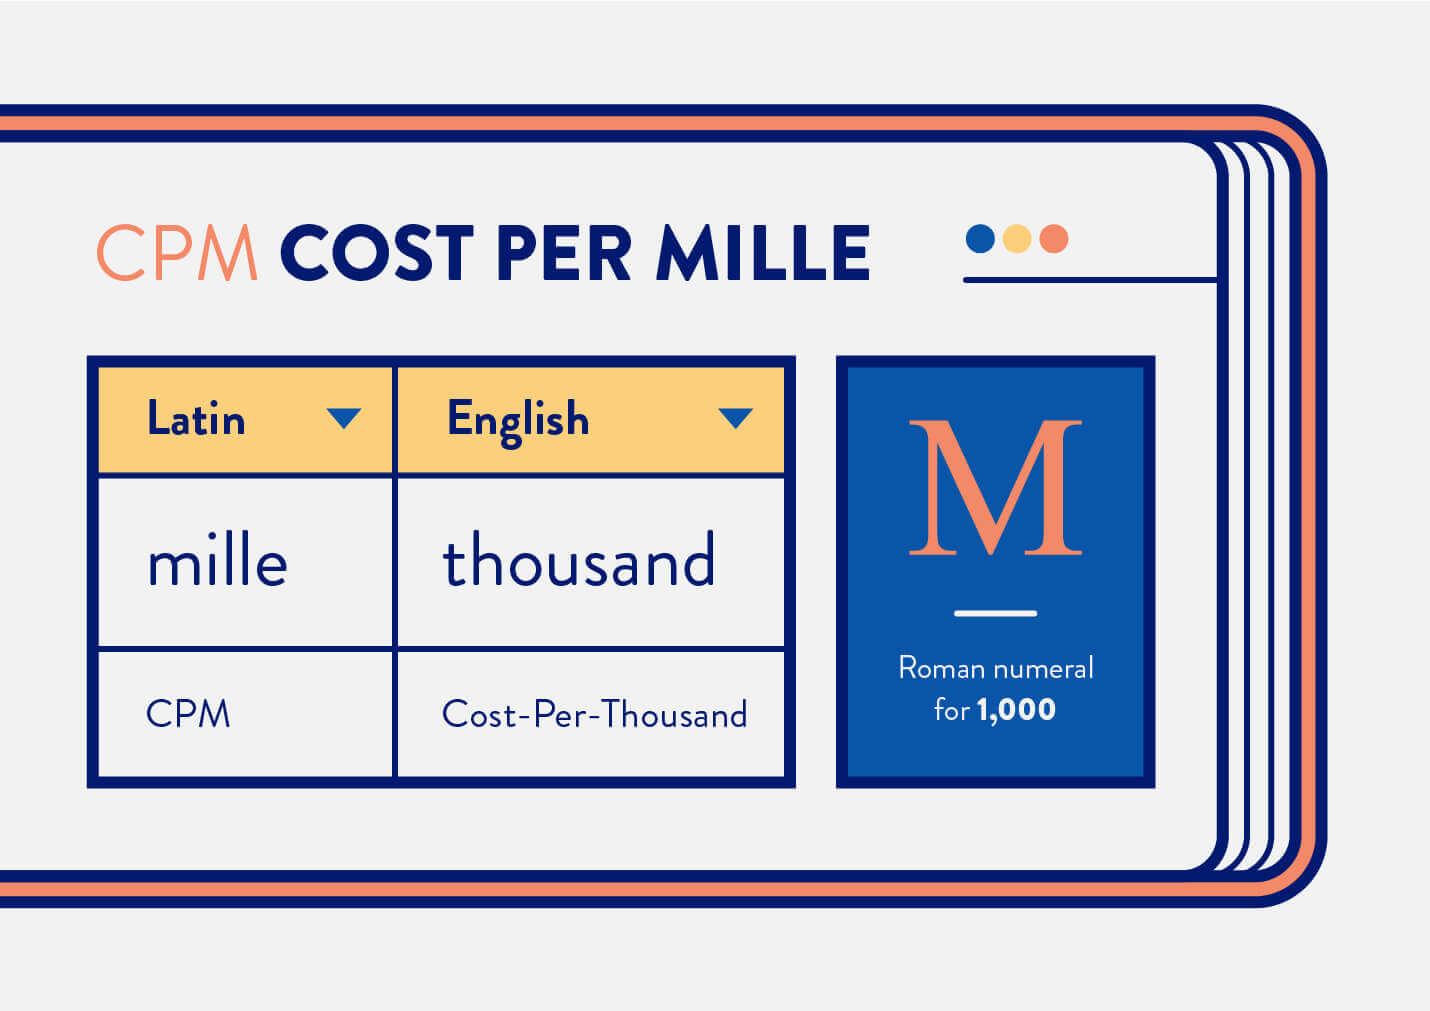 cost per mille translated to cost per thousand where M stands for 1,000